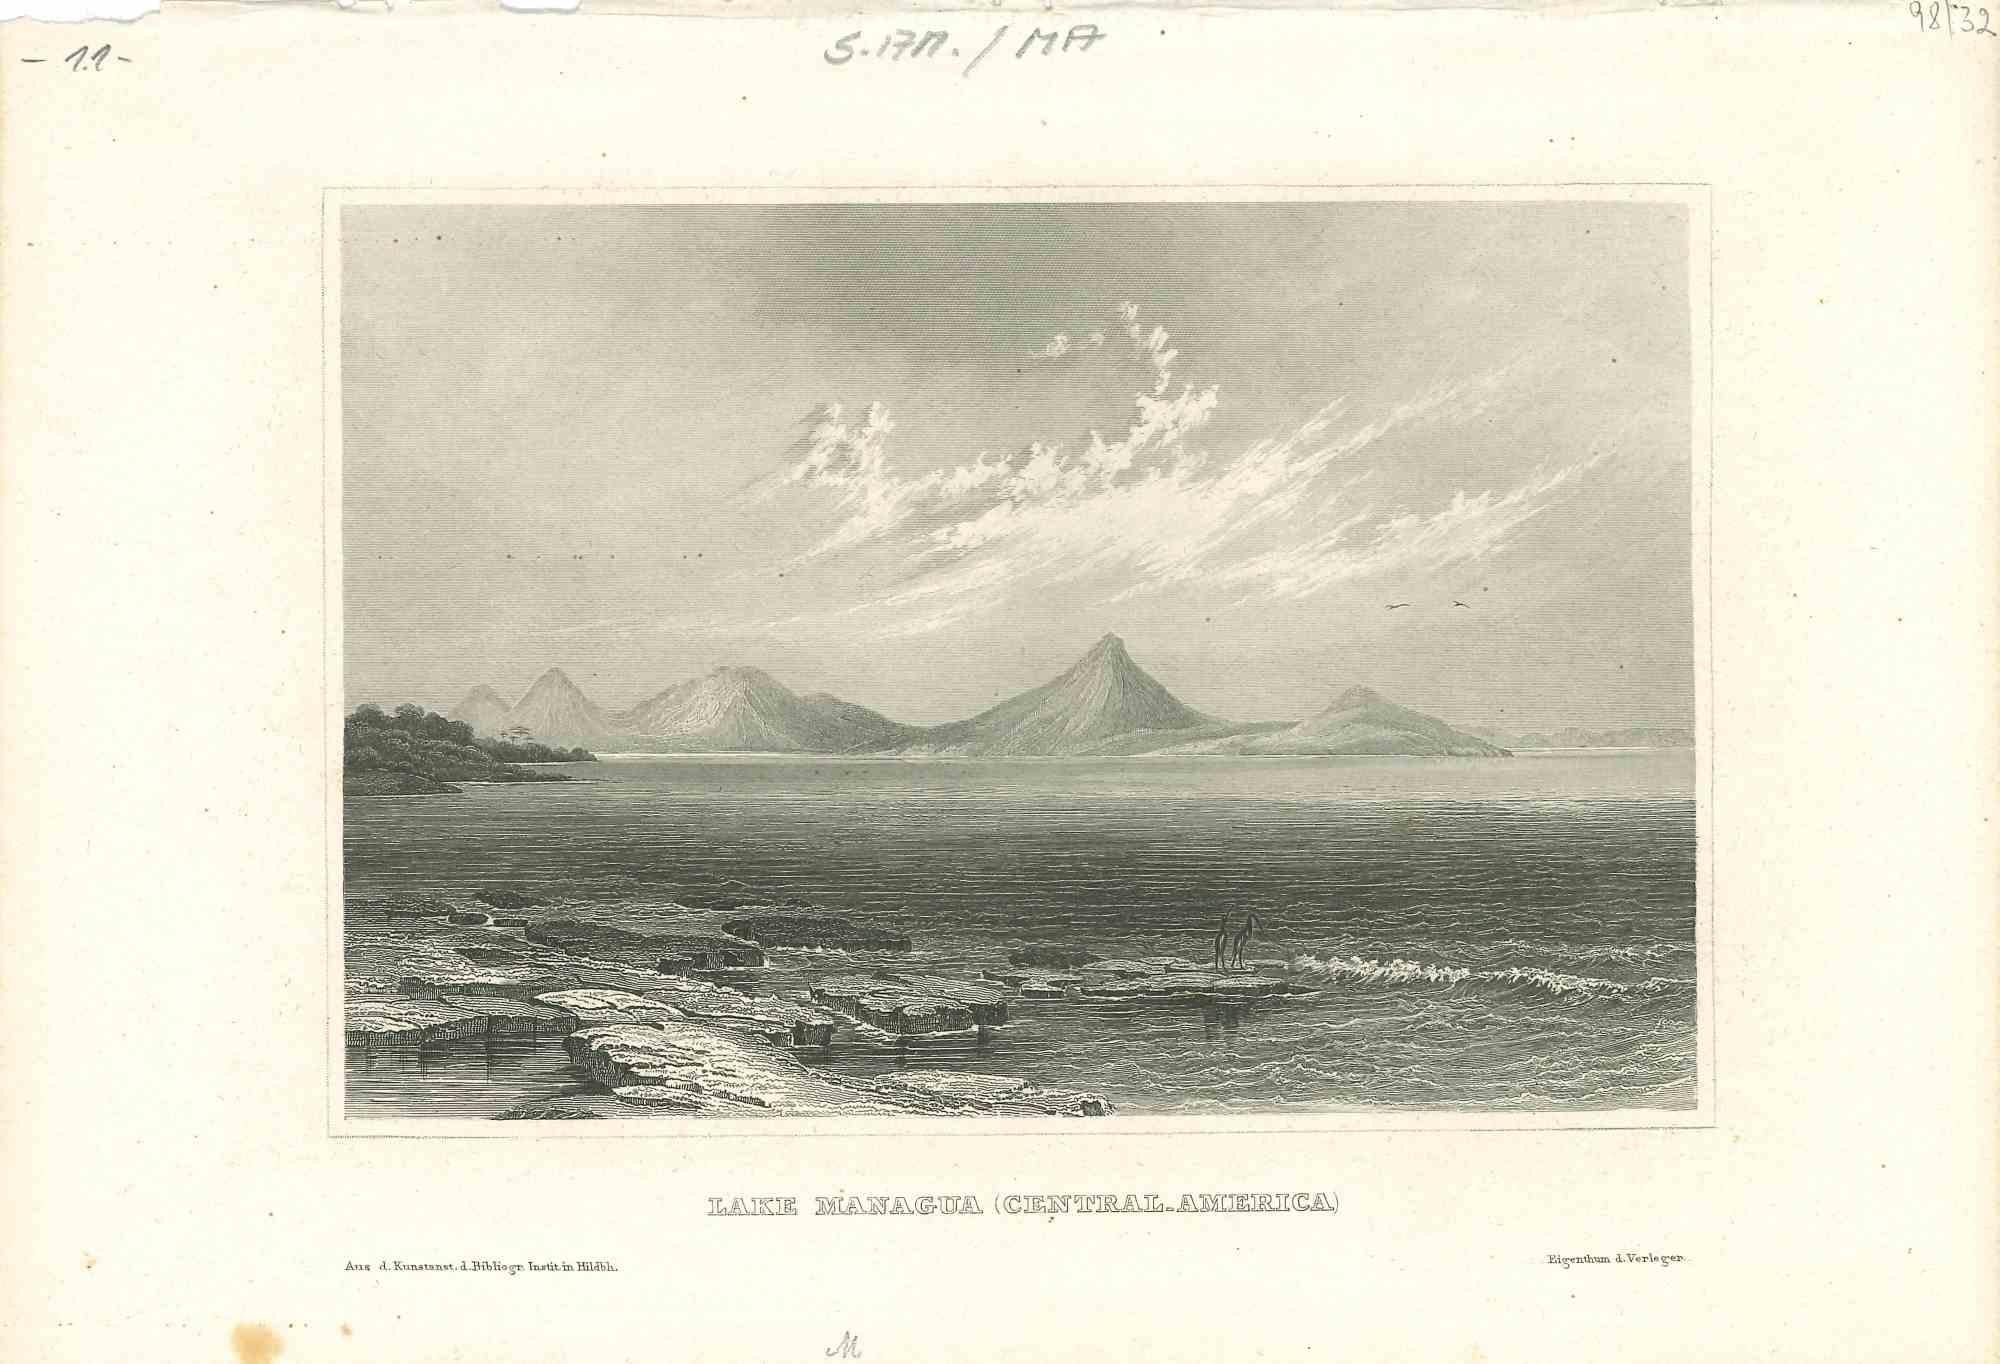 Unknown Figurative Print - Ancient View of Lake Managua - Original Lithograph - Early 19th Century